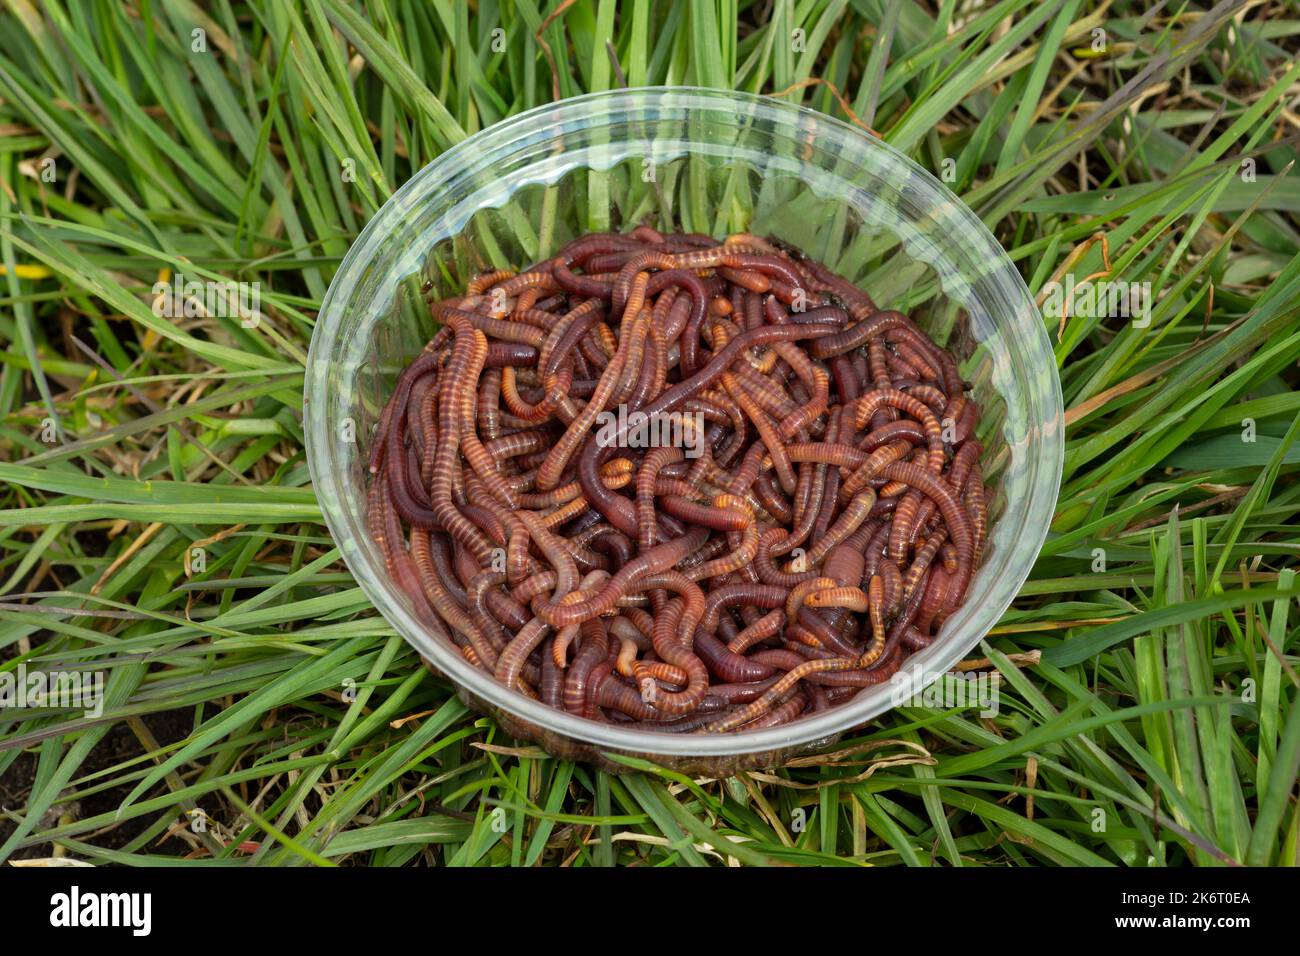 https://c8.alamy.com/comp/2K6T0EA/worms-in-a-jar-on-green-grass-fishing-bait-and-compost-worms-in-a-seventh-farm-2K6T0EA.jpg